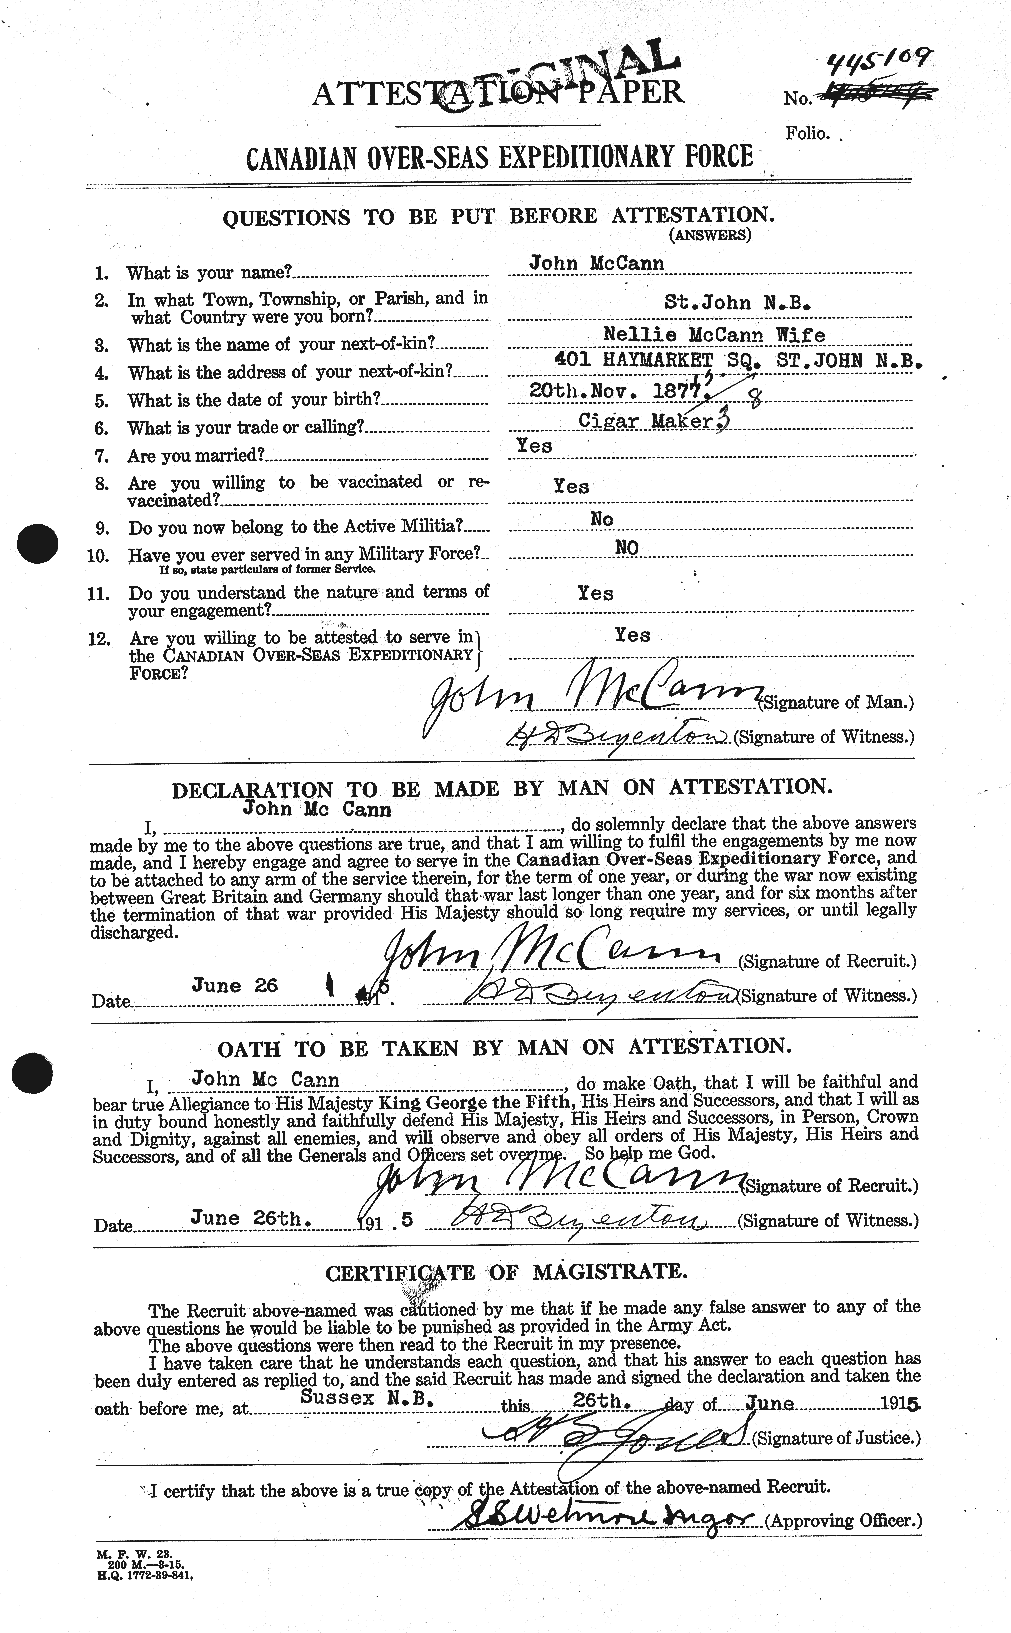 Personnel Records of the First World War - CEF 132727a